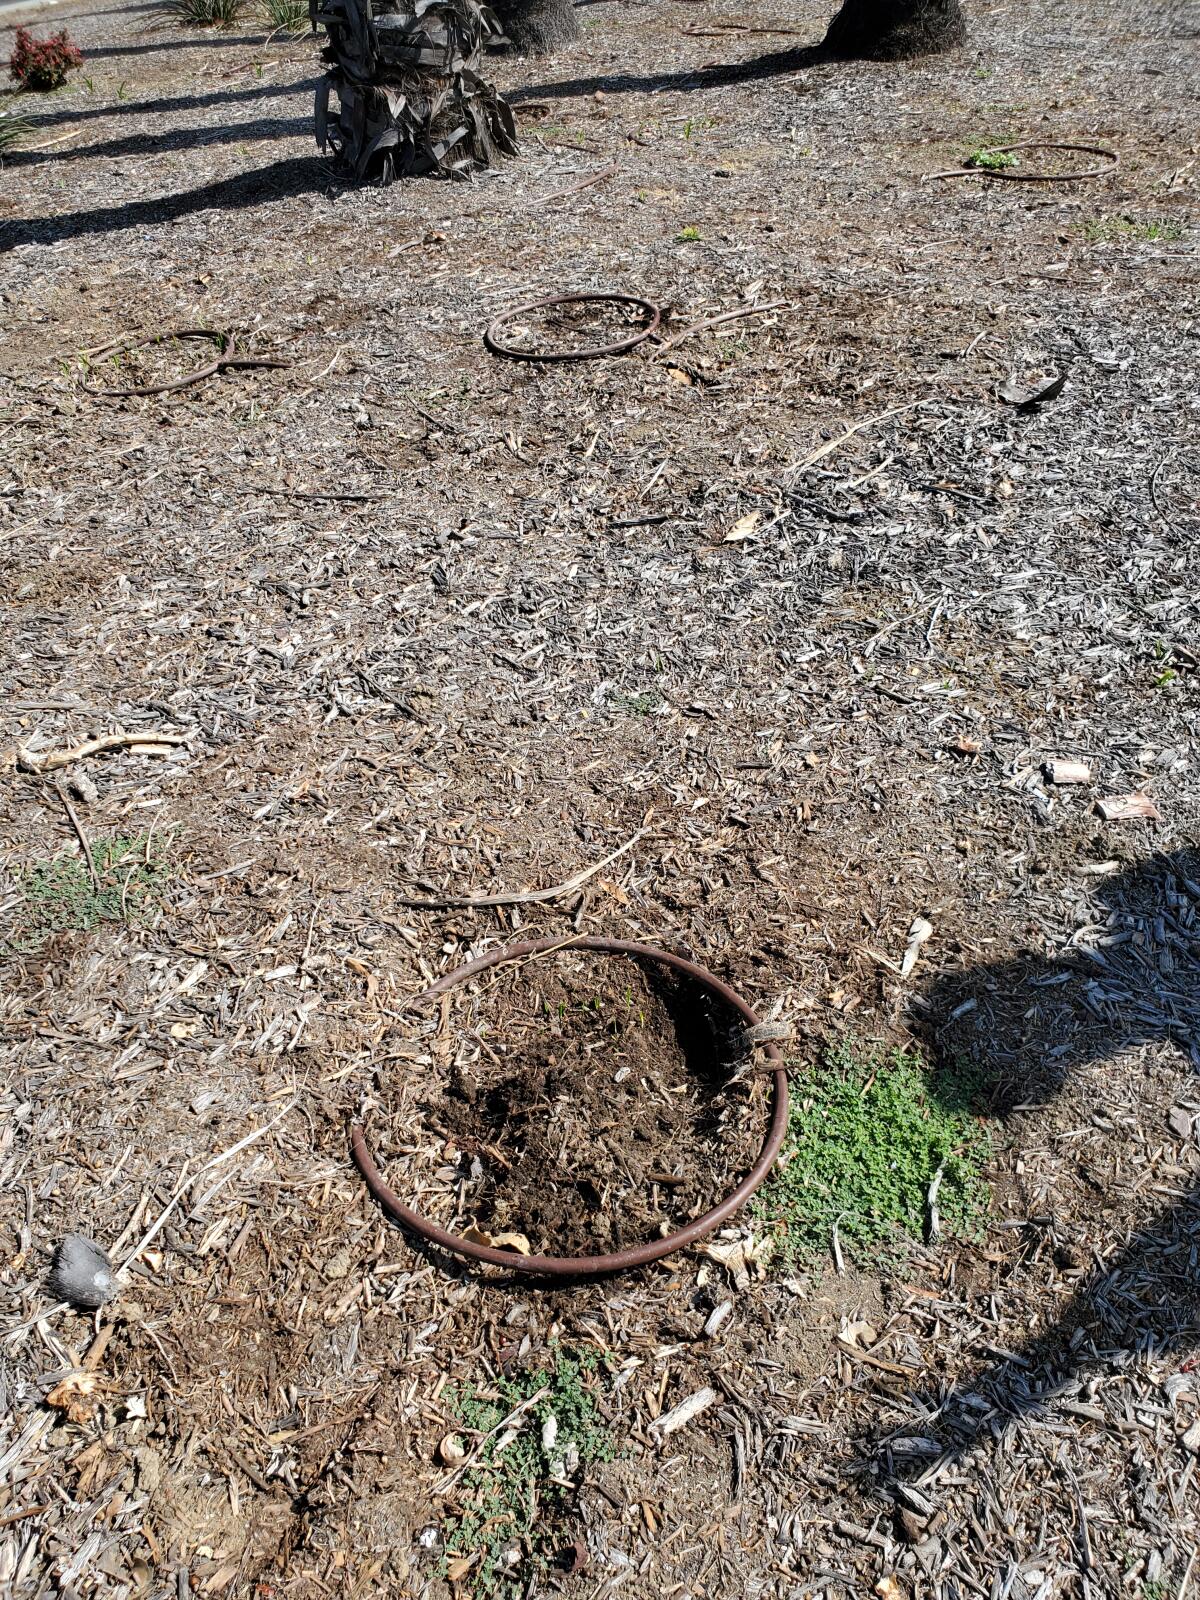 Irrigation loops indicate where plants once were but have since died and been removed.